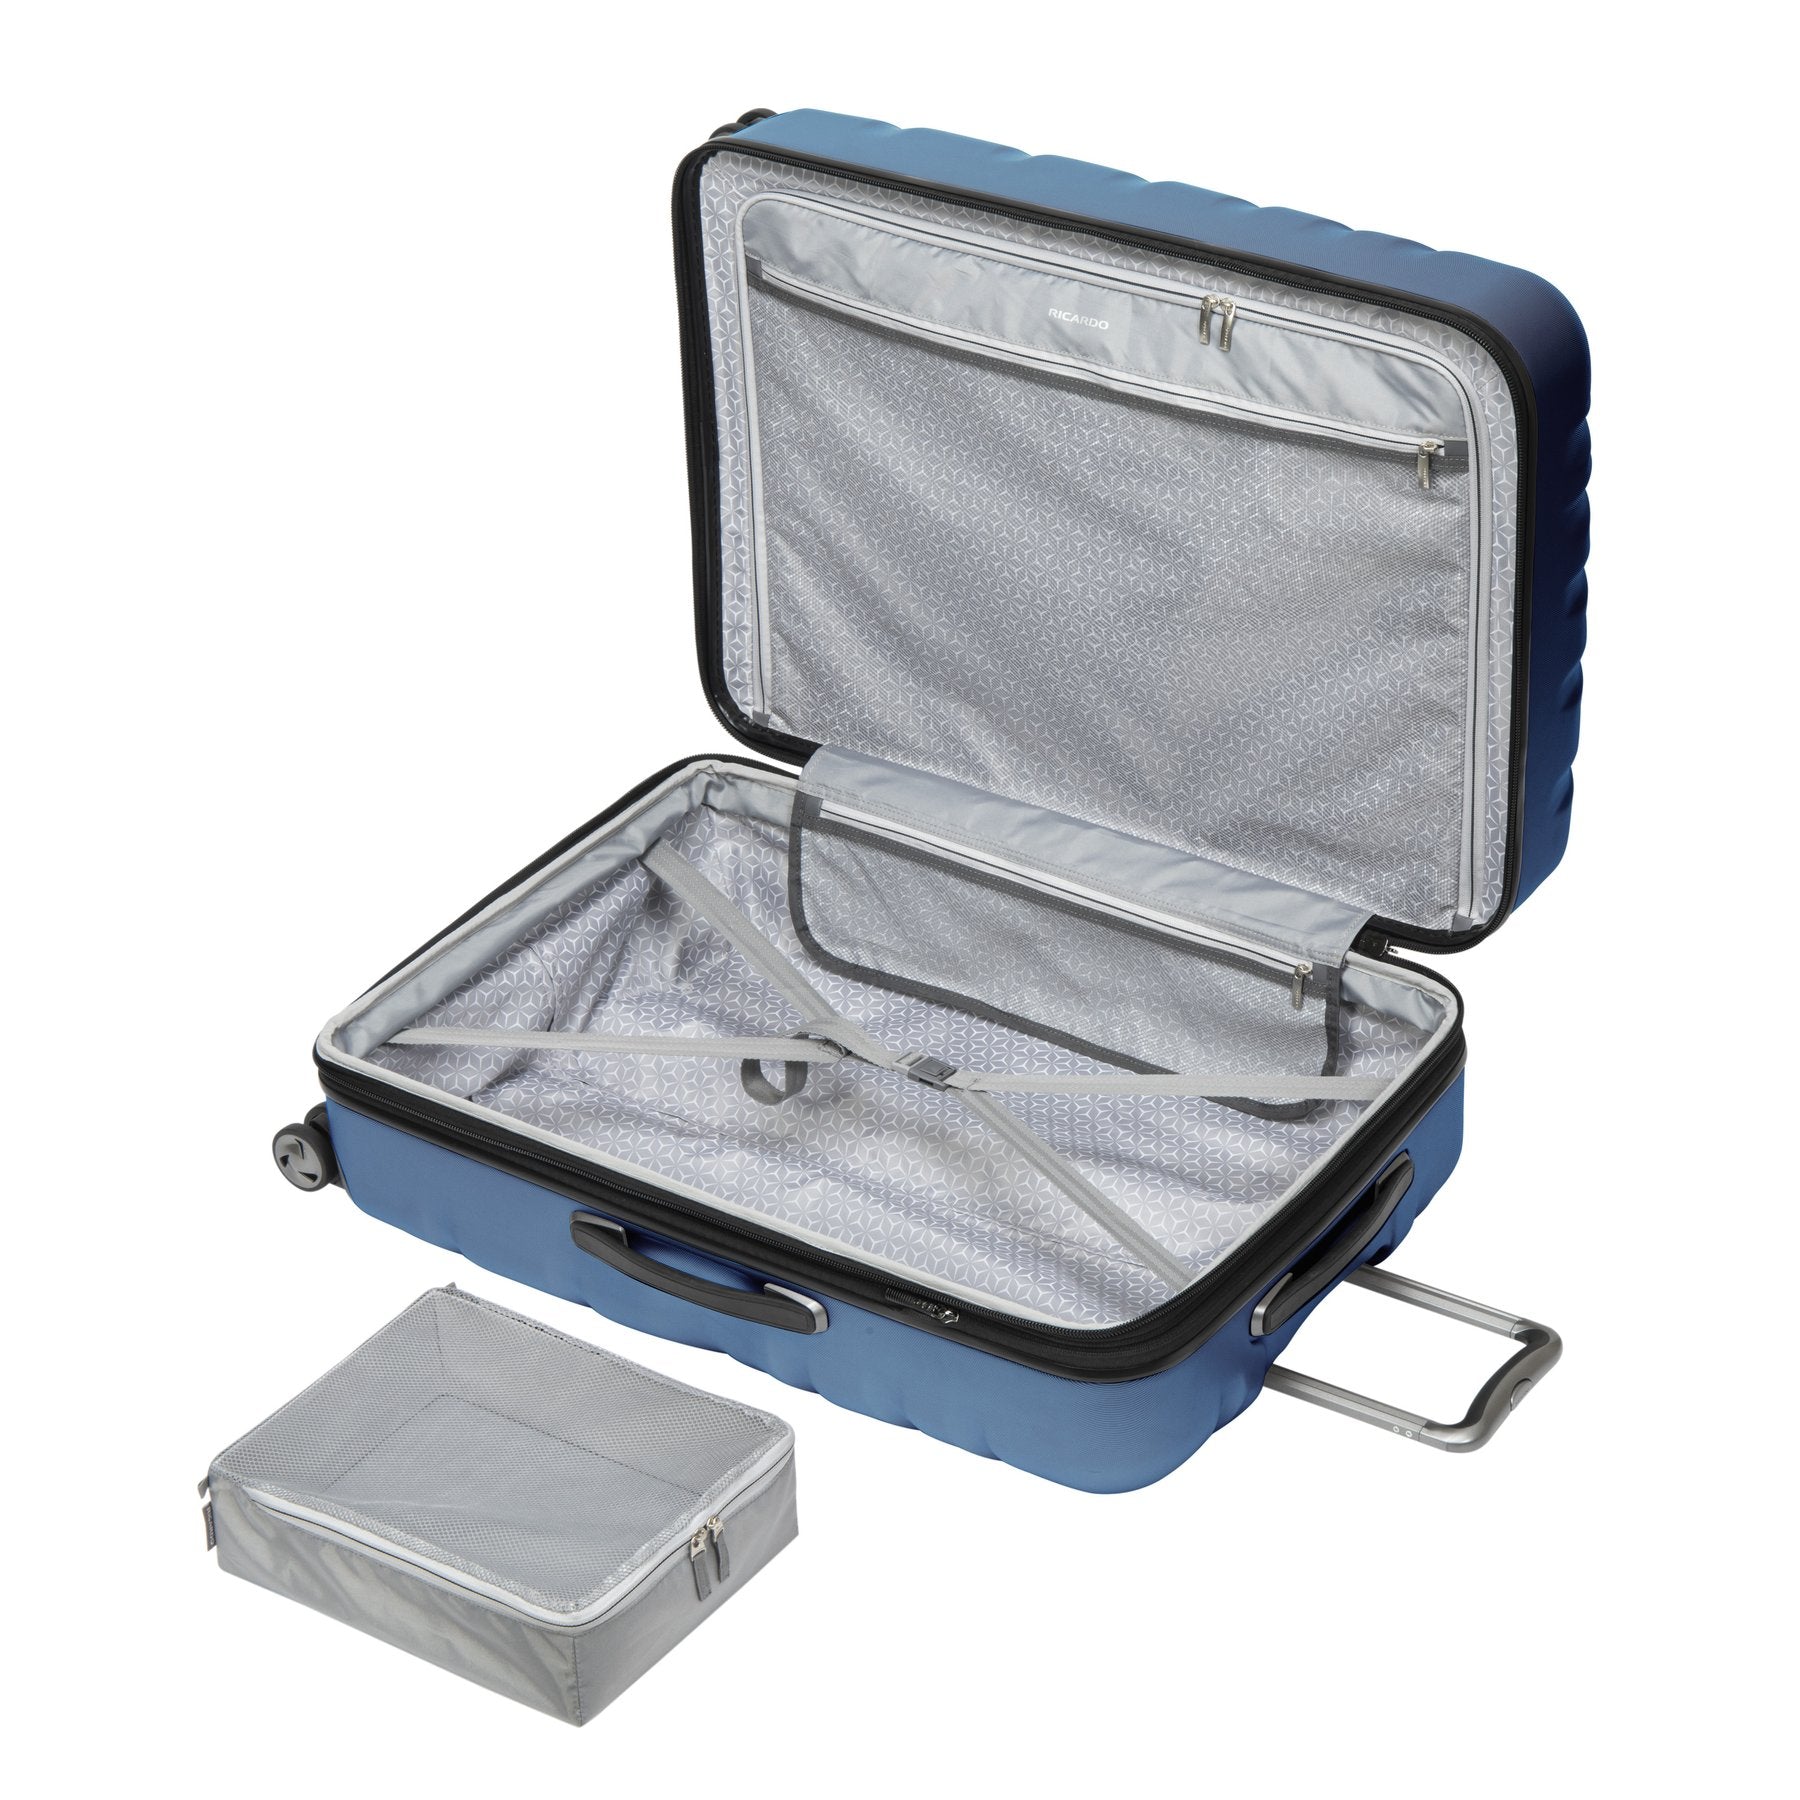 open blue Mojave check-in with grey patterned lining shown with large grey packing cube